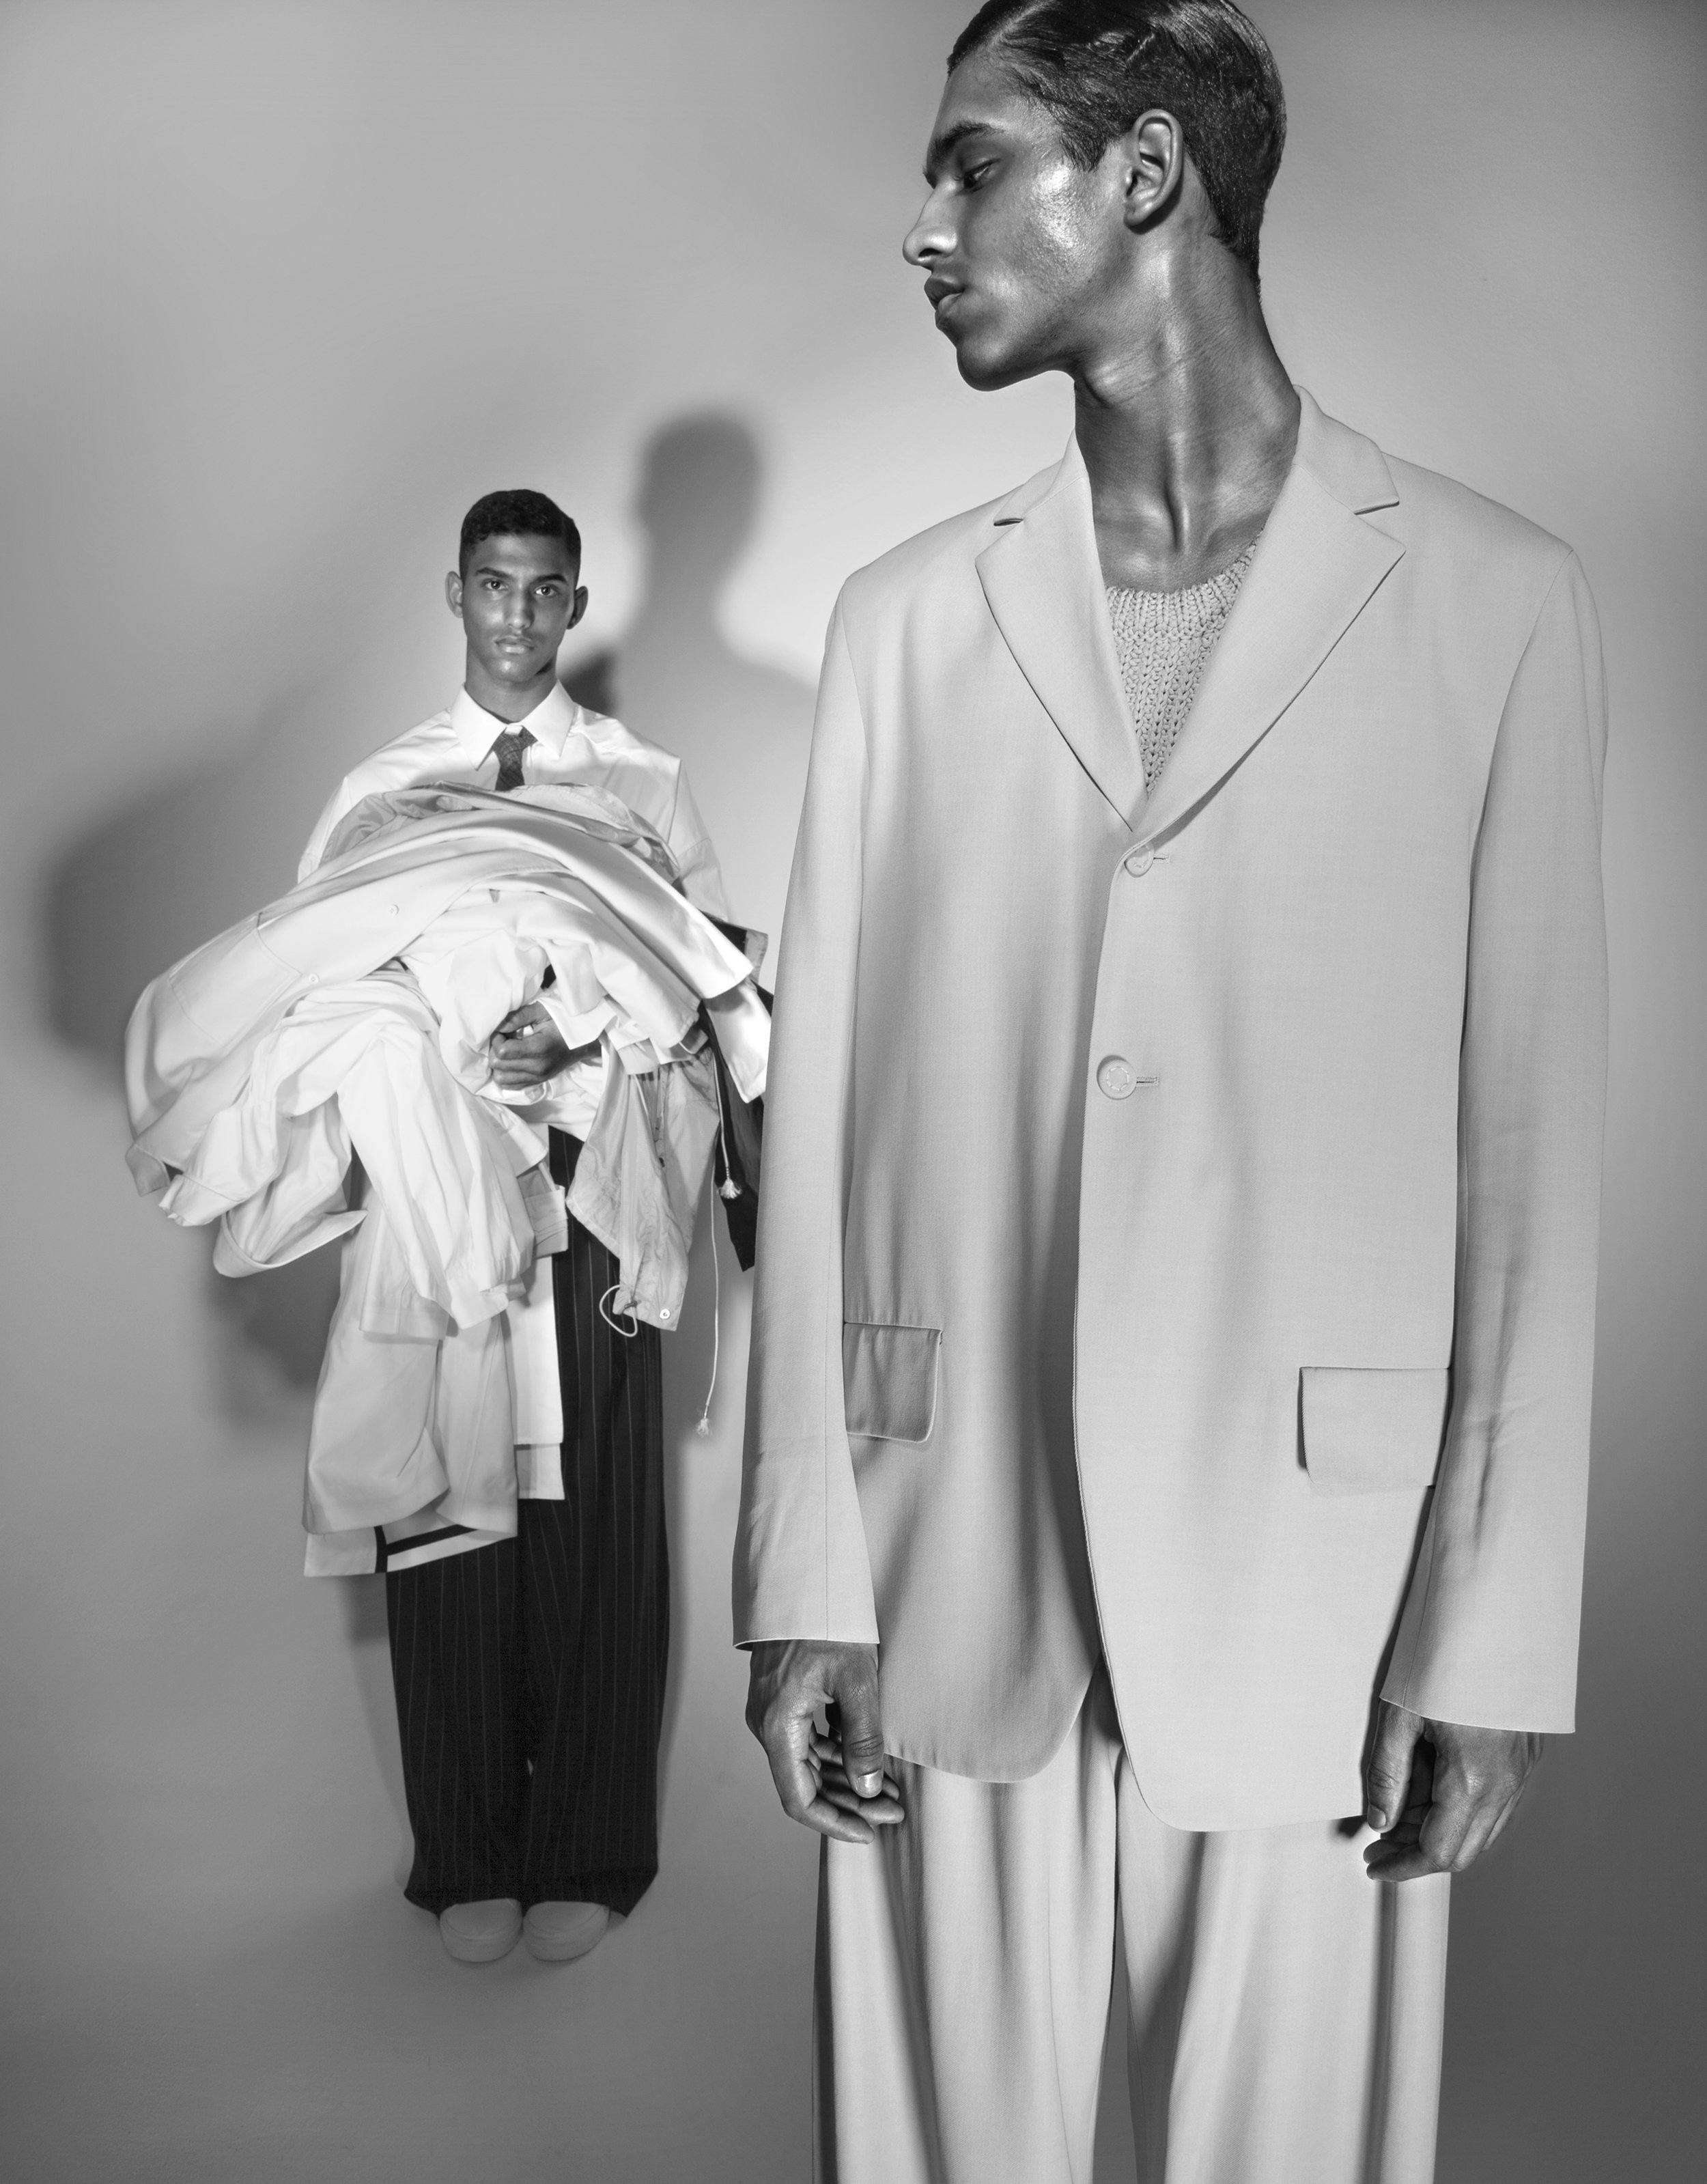   Hector and Jan Carlos Diaz by Anthony Goicolea for L’Officiel USA  